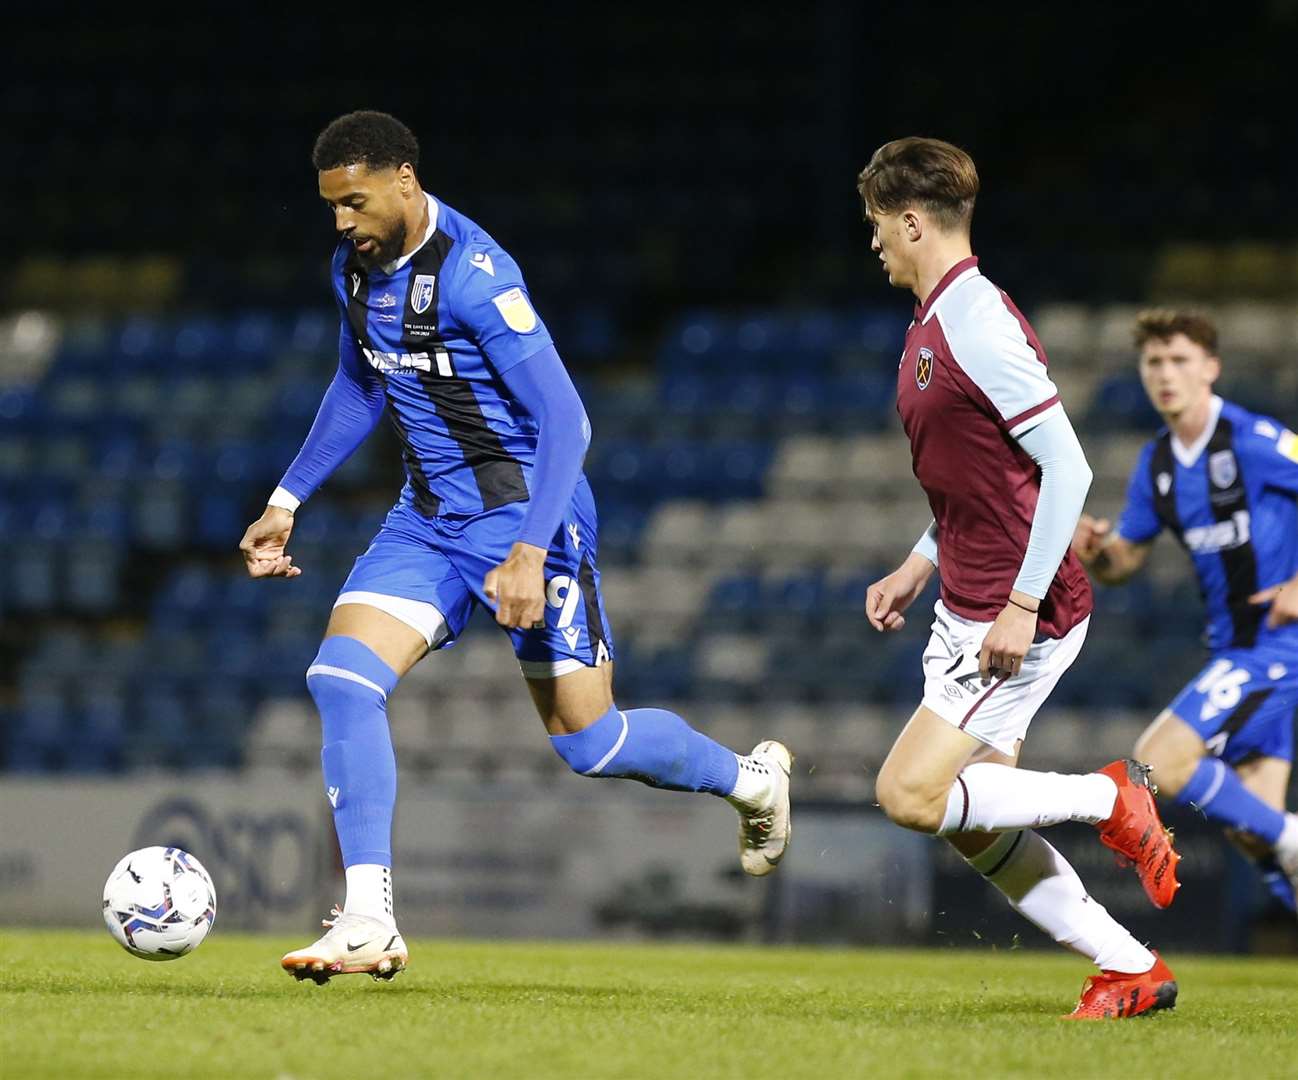 Gills striker Vadaine Oliver on the ball against West Ham under-21s in the EFL Trophy on Tuesday night Picture: Andy Jones